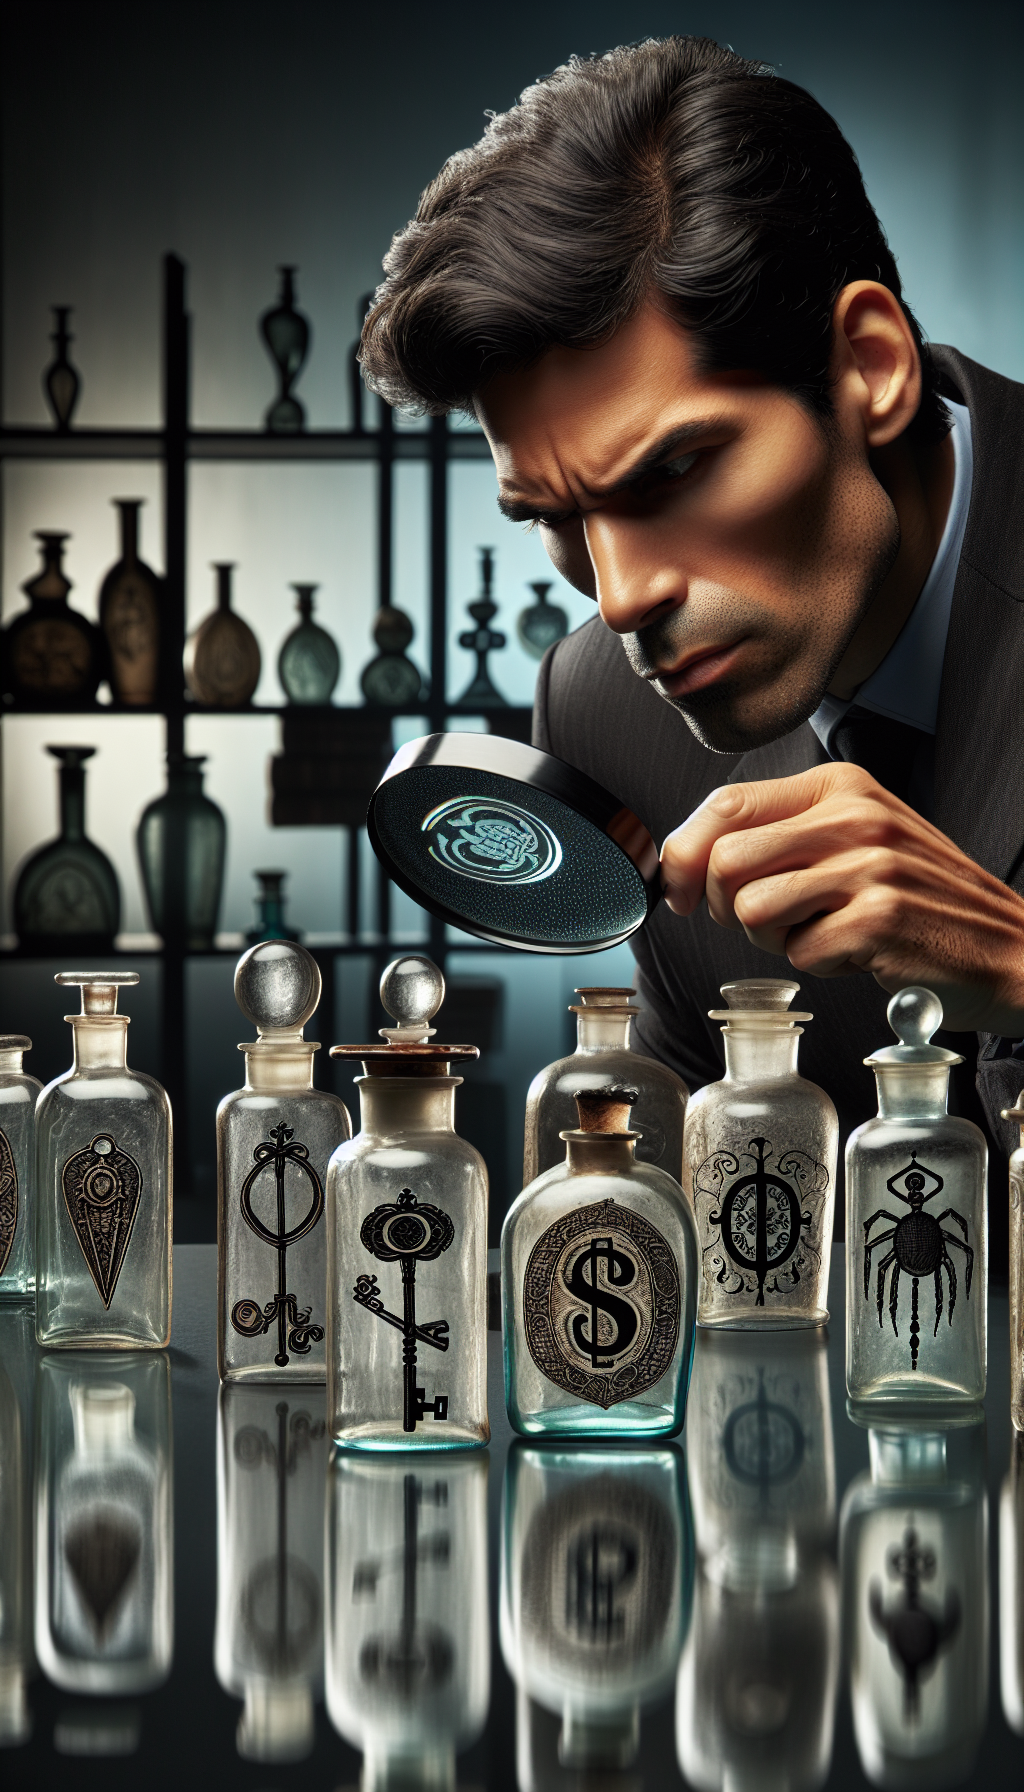 An eclectic detective peers through a magnifying glass at a lineup of old glass medicine bottles, each casting a unique shadow that reveals hidden symbols—a key for rarity, a dollar sign for value, and a question mark for mystery. The bottles themselves are intricately styled, ranging from sleek art deco to ornate Victorian, spotlighting their distinctiveness.